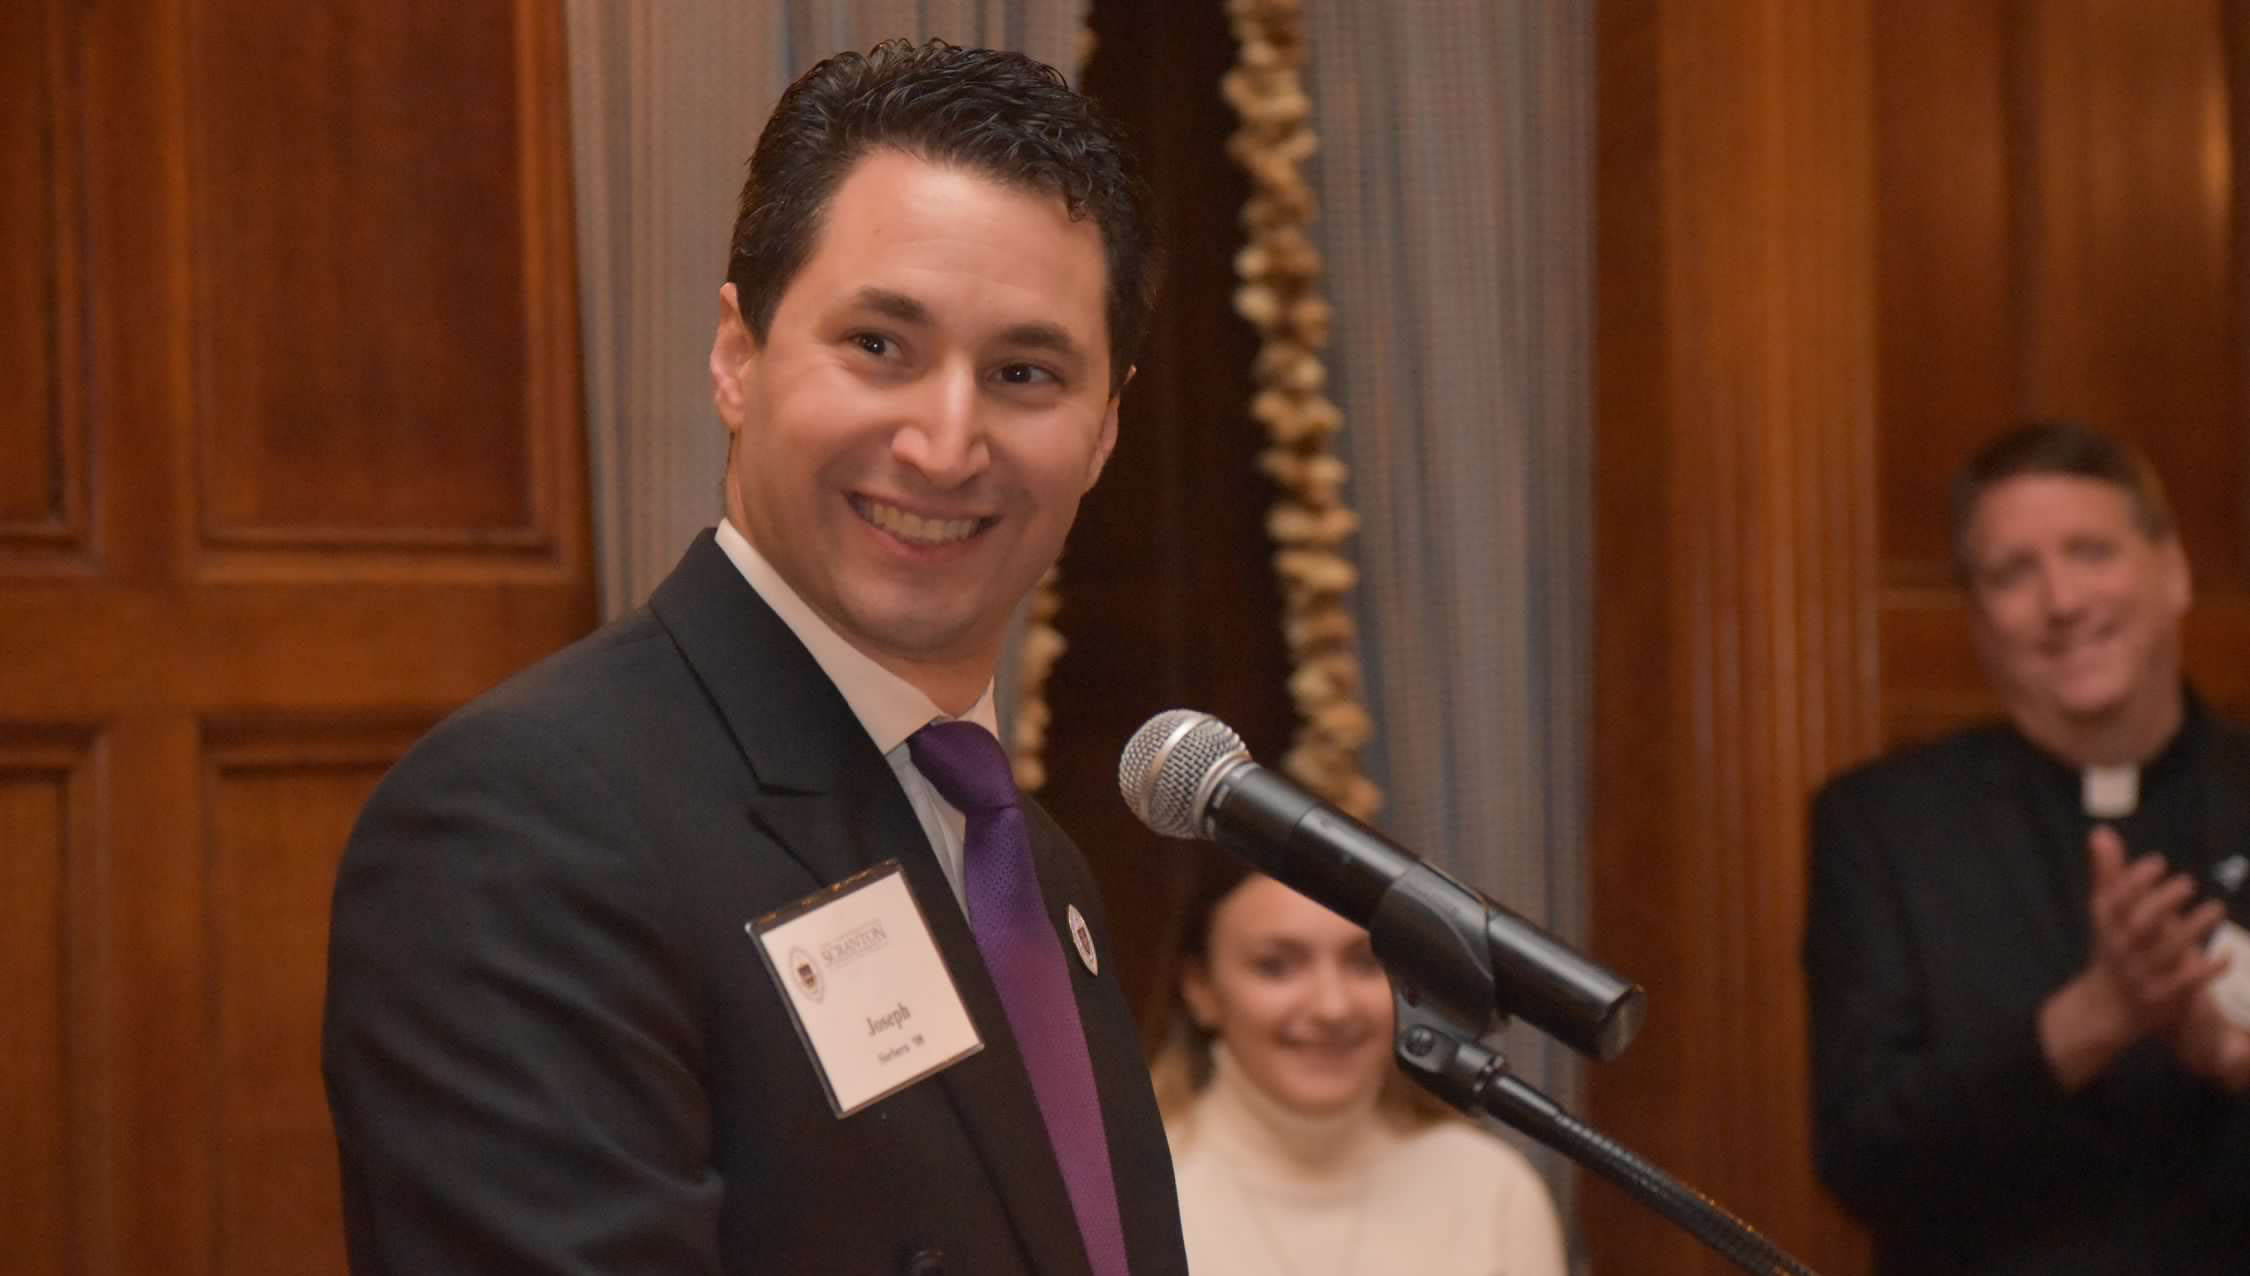 Joseph L. Sorbera III '08, seen here at the New York Christmas Party in 2017, has been named the new chair of The Alumni Society Advisory Board.